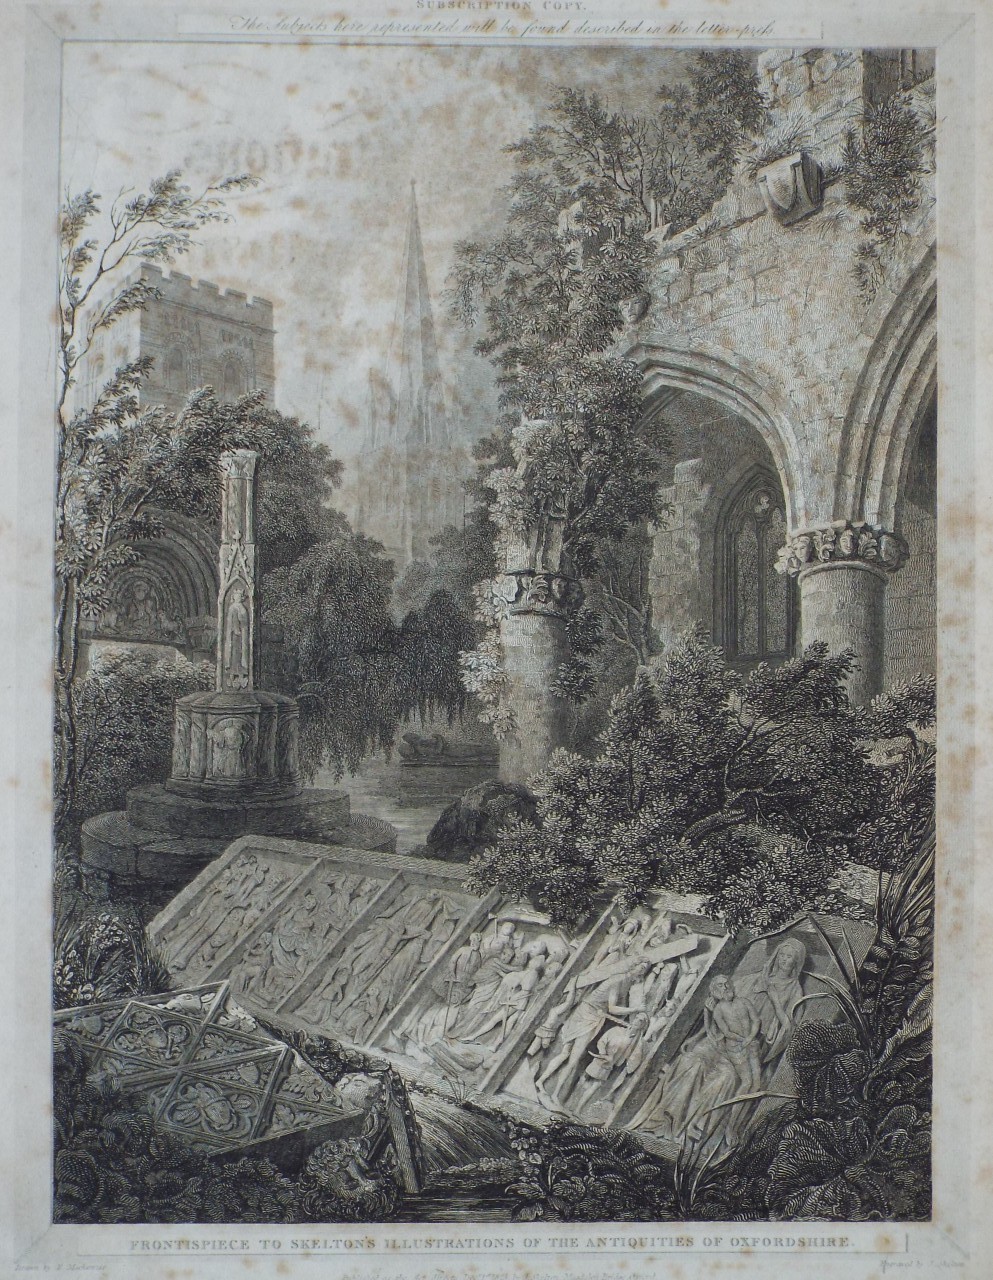 Print - Frontispiece to Skelton's Illustrations of the Antiquities of Oxfordshire. - Skelton